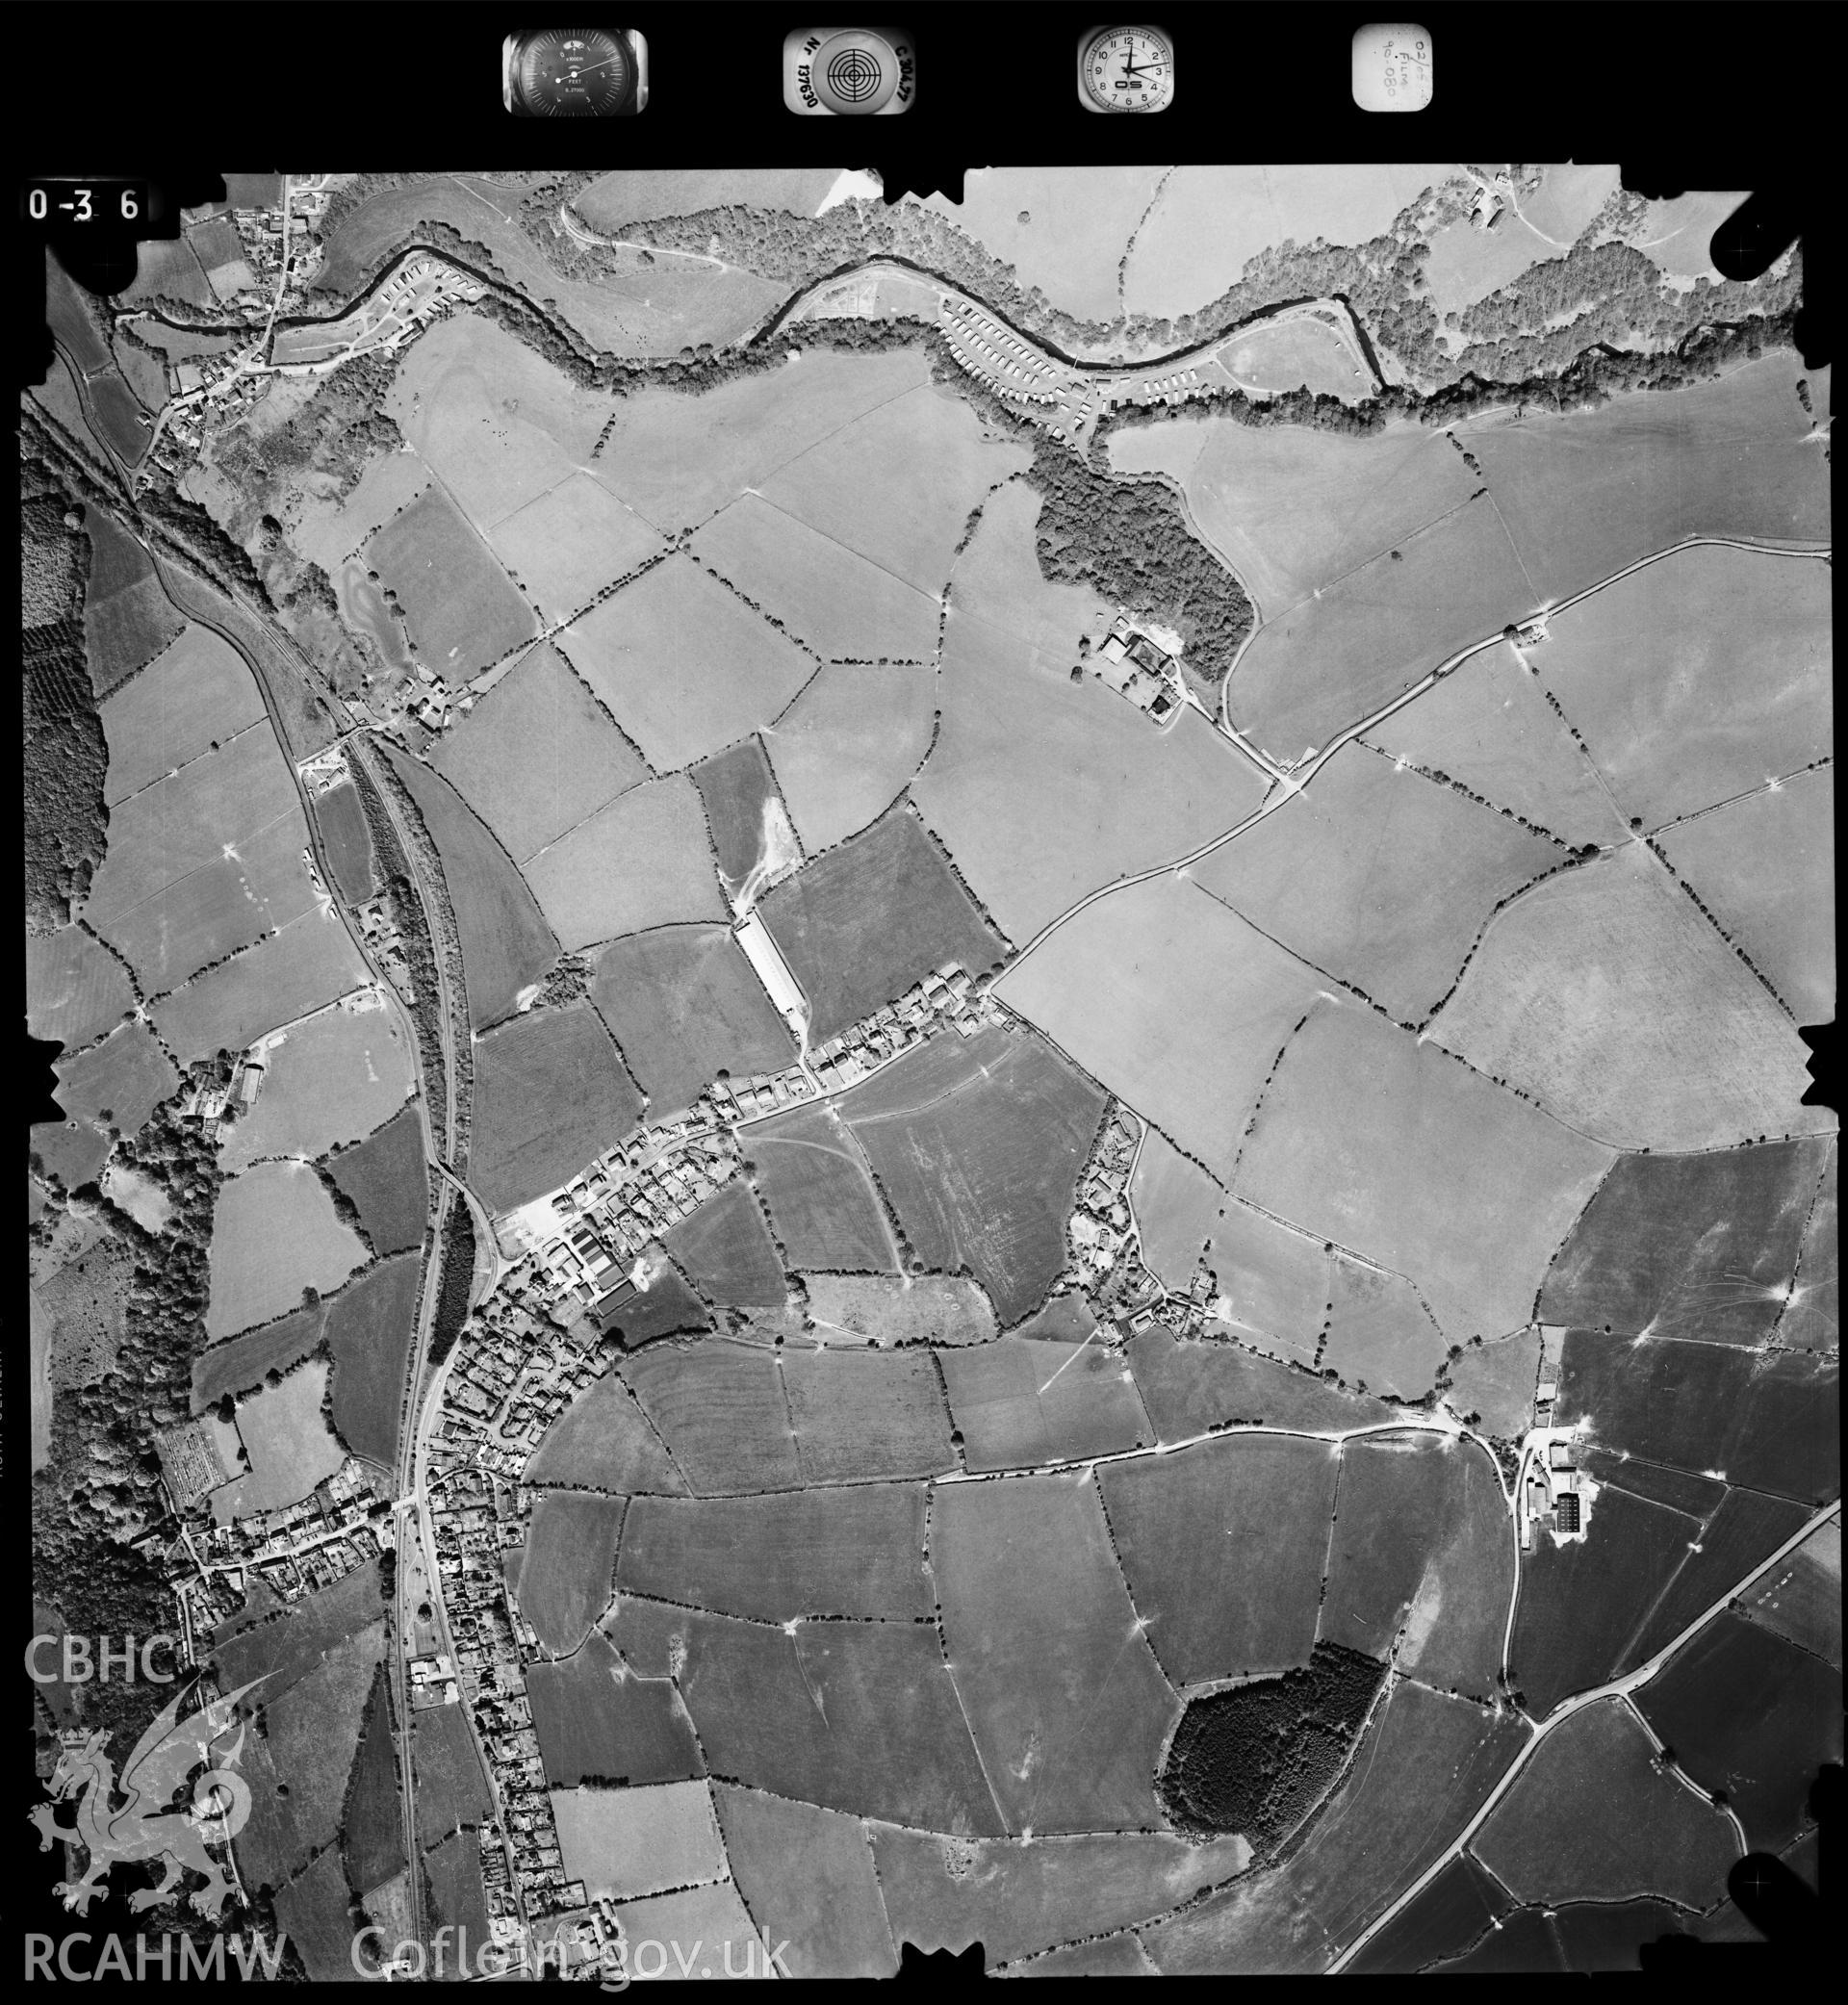 Digitized copy of an aerial photograph showing Llandre, taken by Ordnance Survey, 1990.